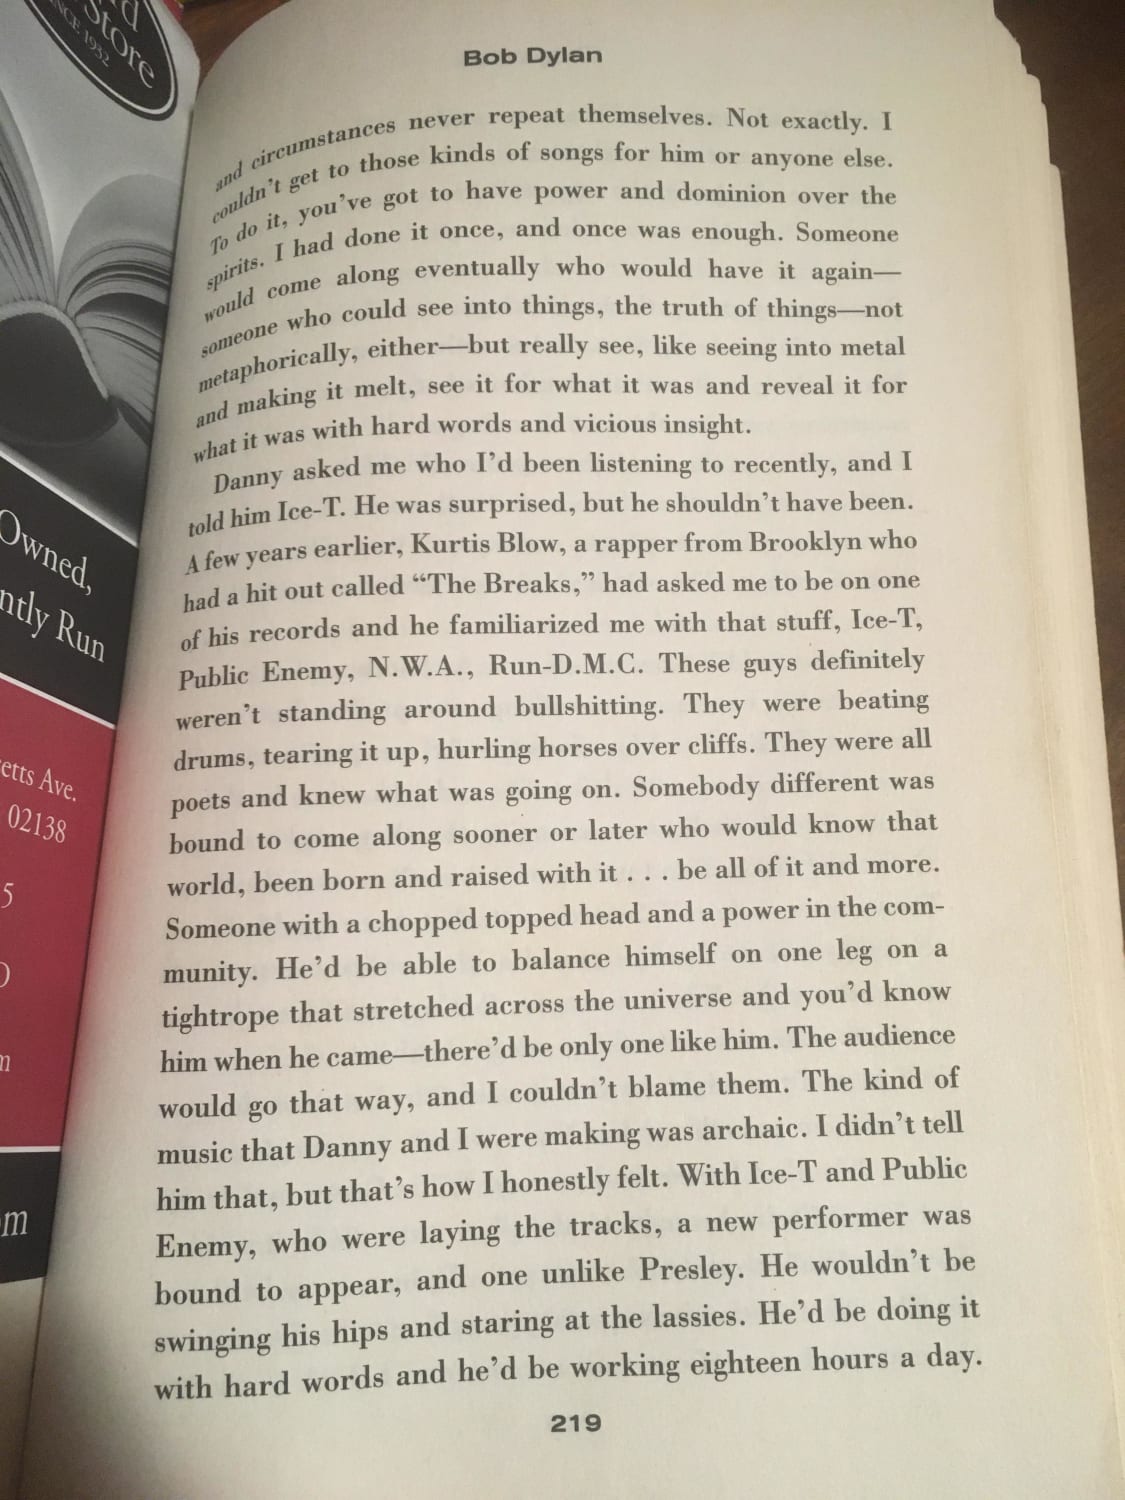 A page from Bob Dylan’s book Chronicles, that’s worth checking out if you haven’t seen before.